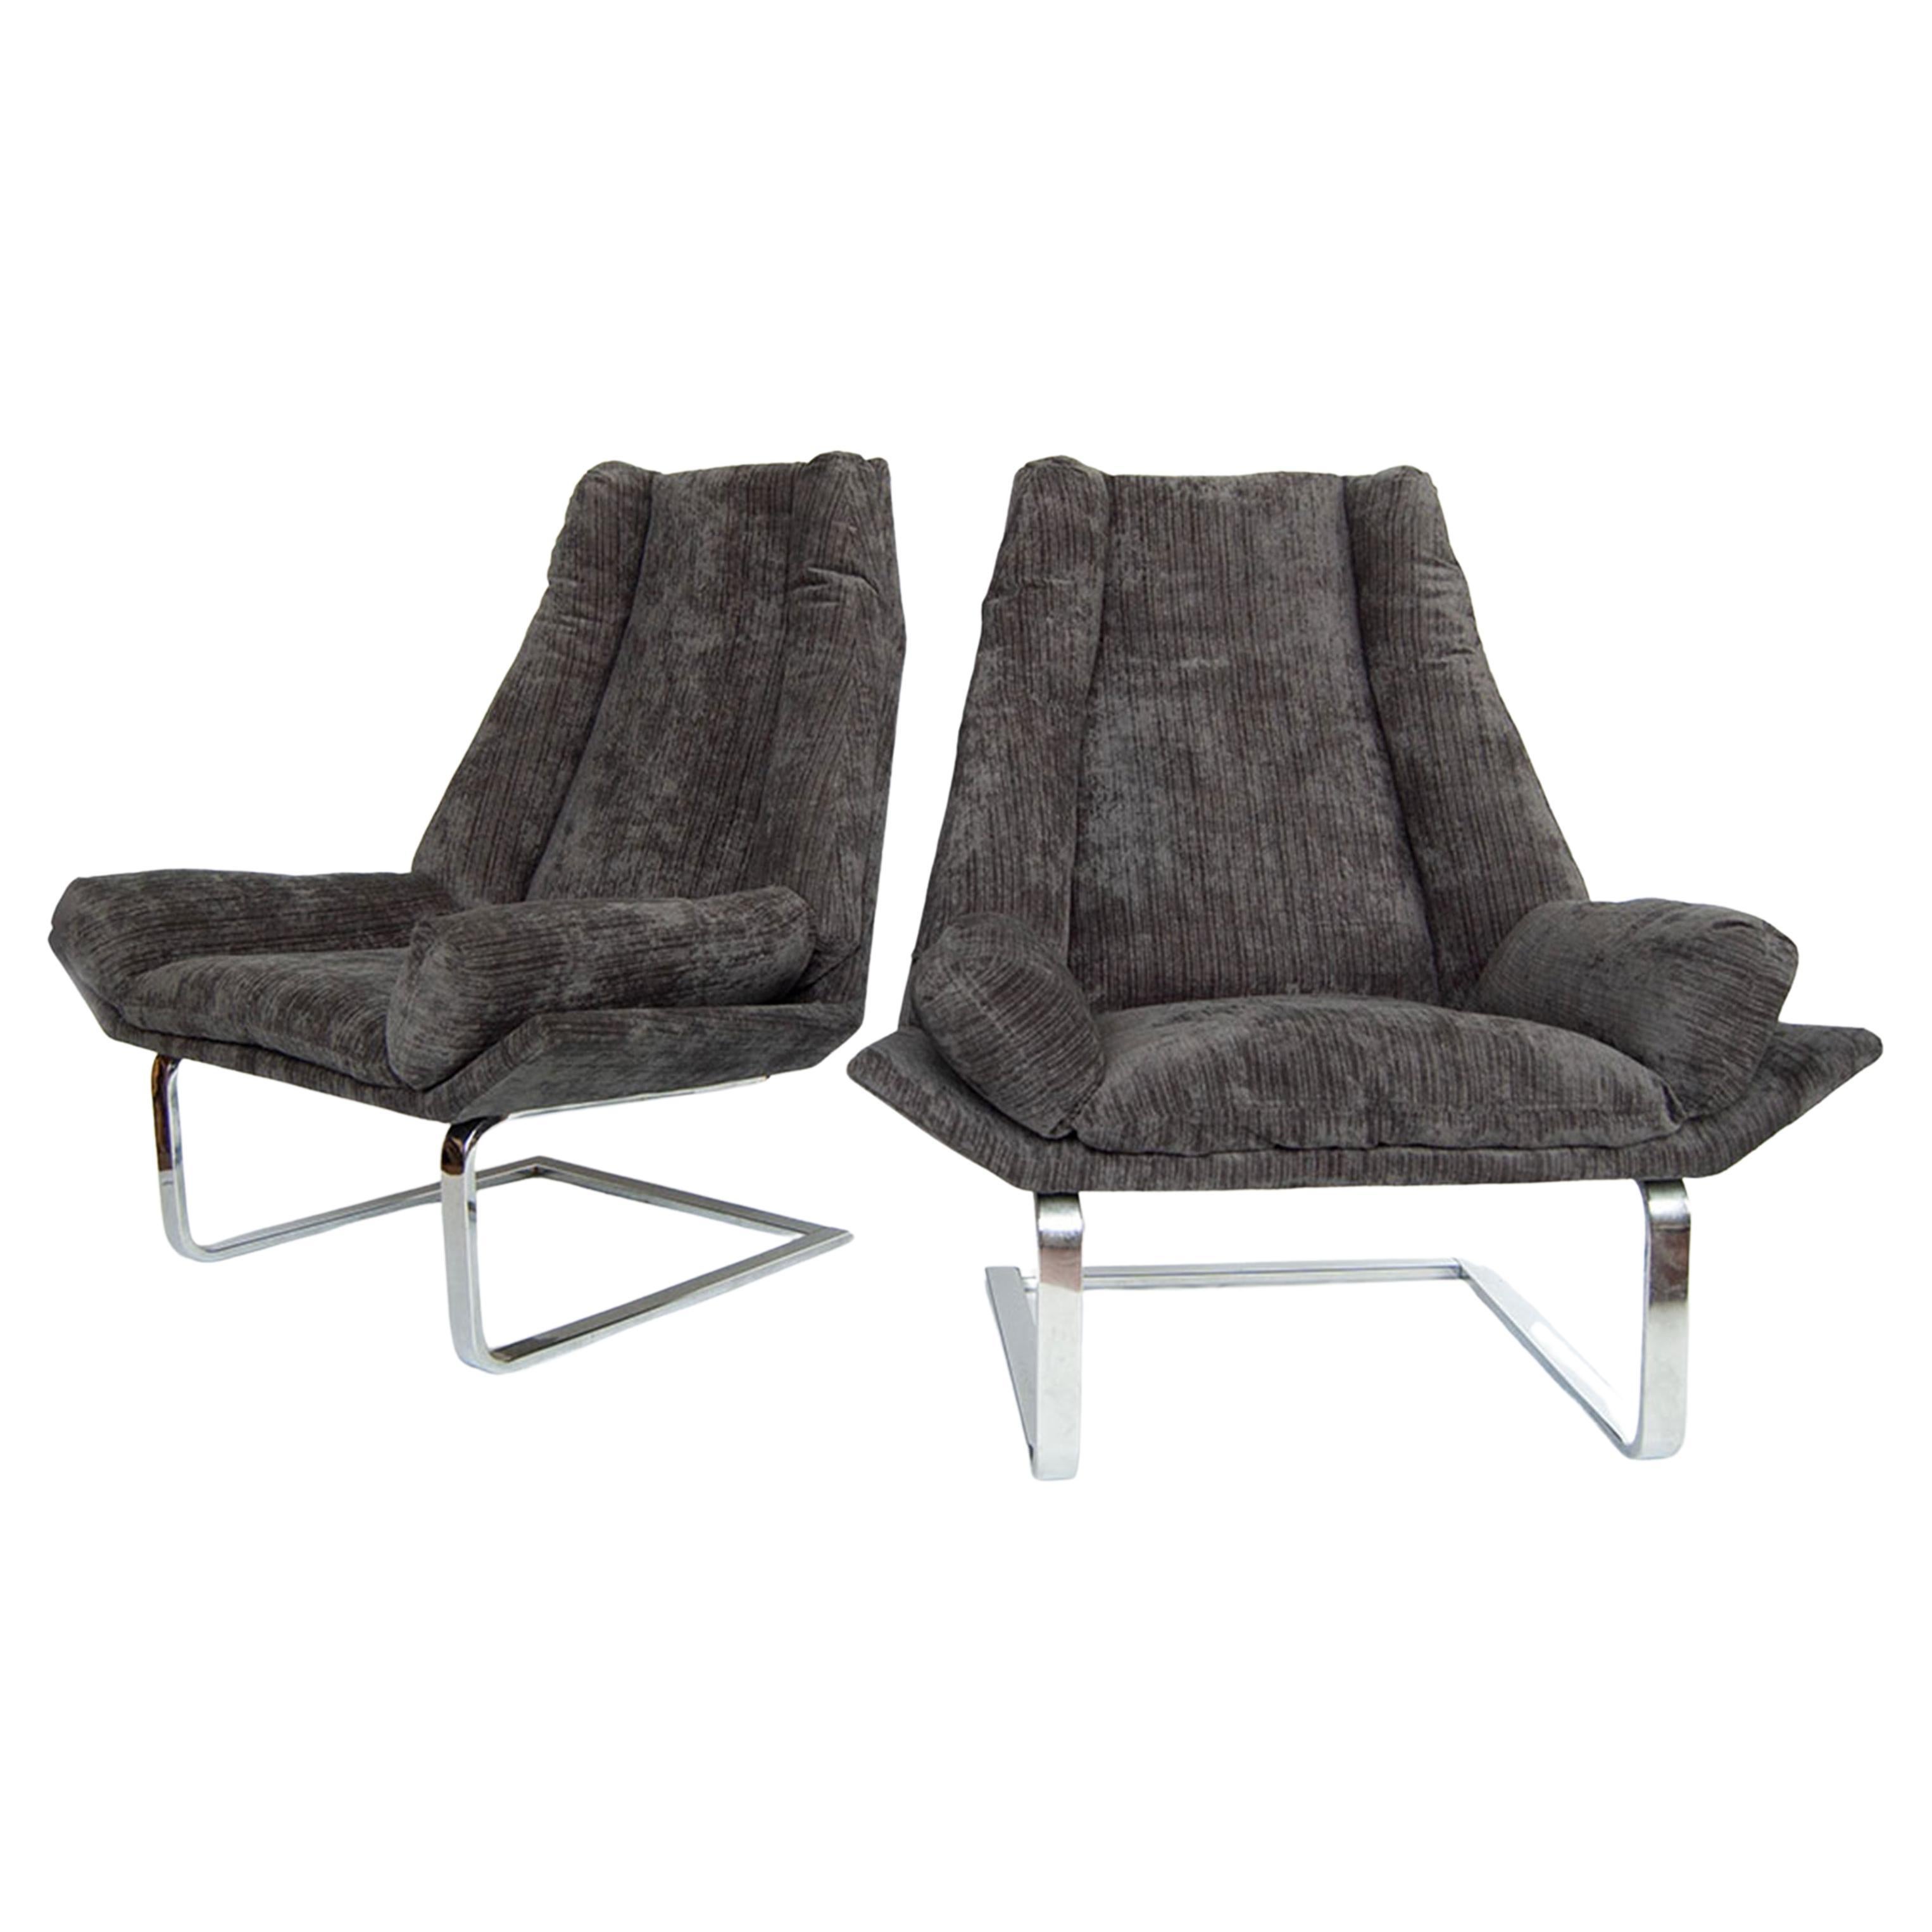 Pair Modern Upholstered Chrome Cantilever Chairs by DIA